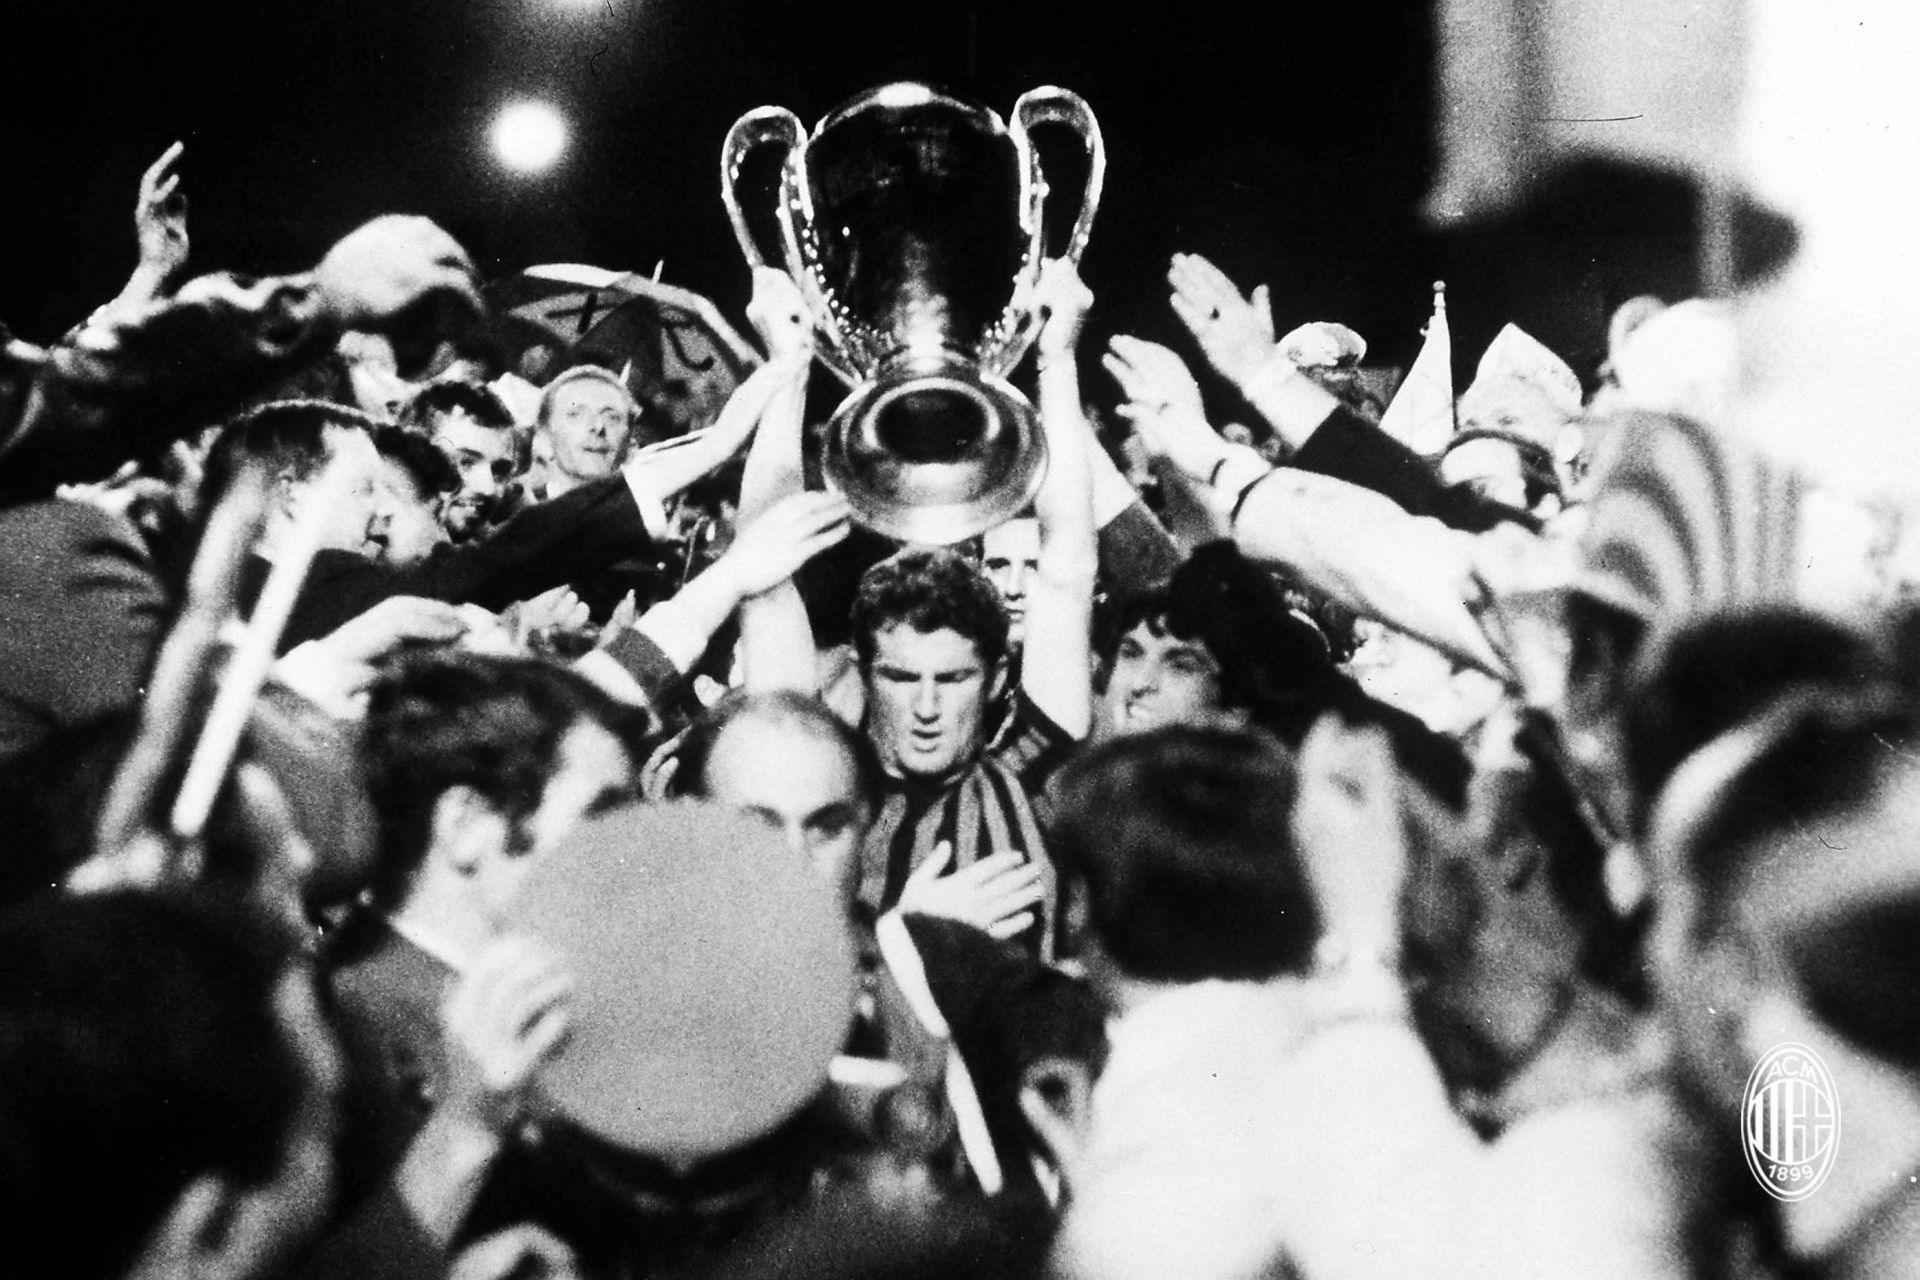 Prati after winning the 1969 European cup trophy. (Image courtesy: AC Milan)